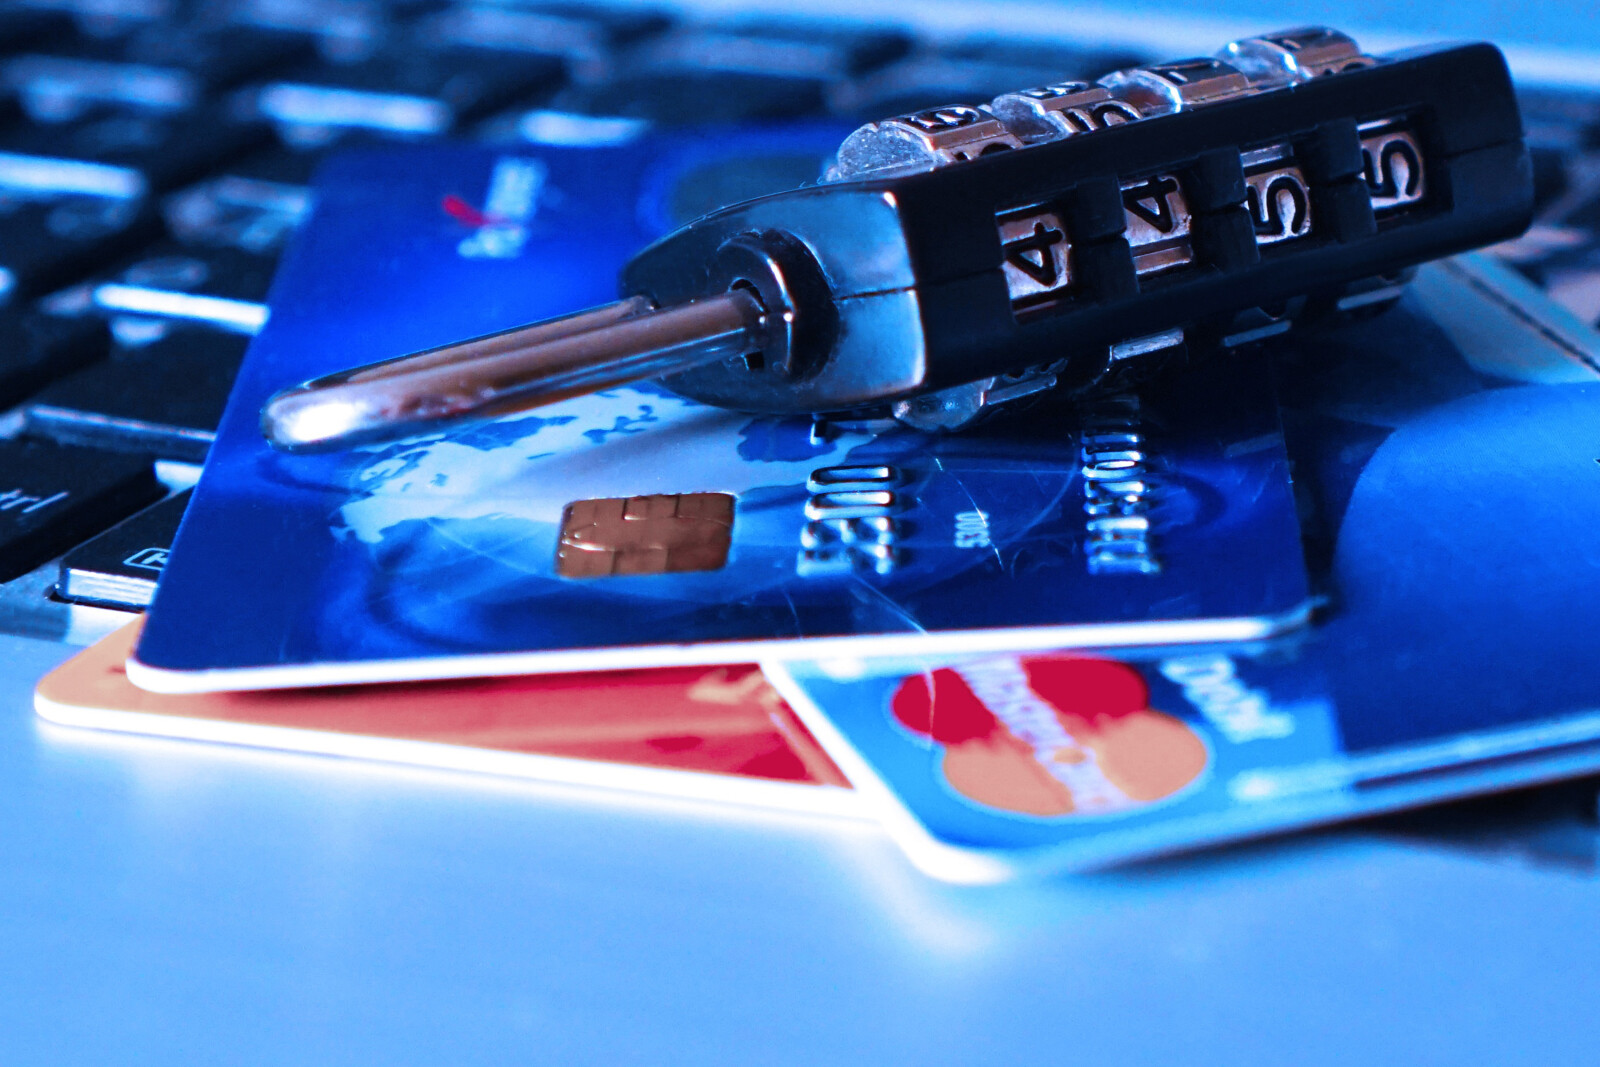 The Legal Consequences of Credit Card Skimming